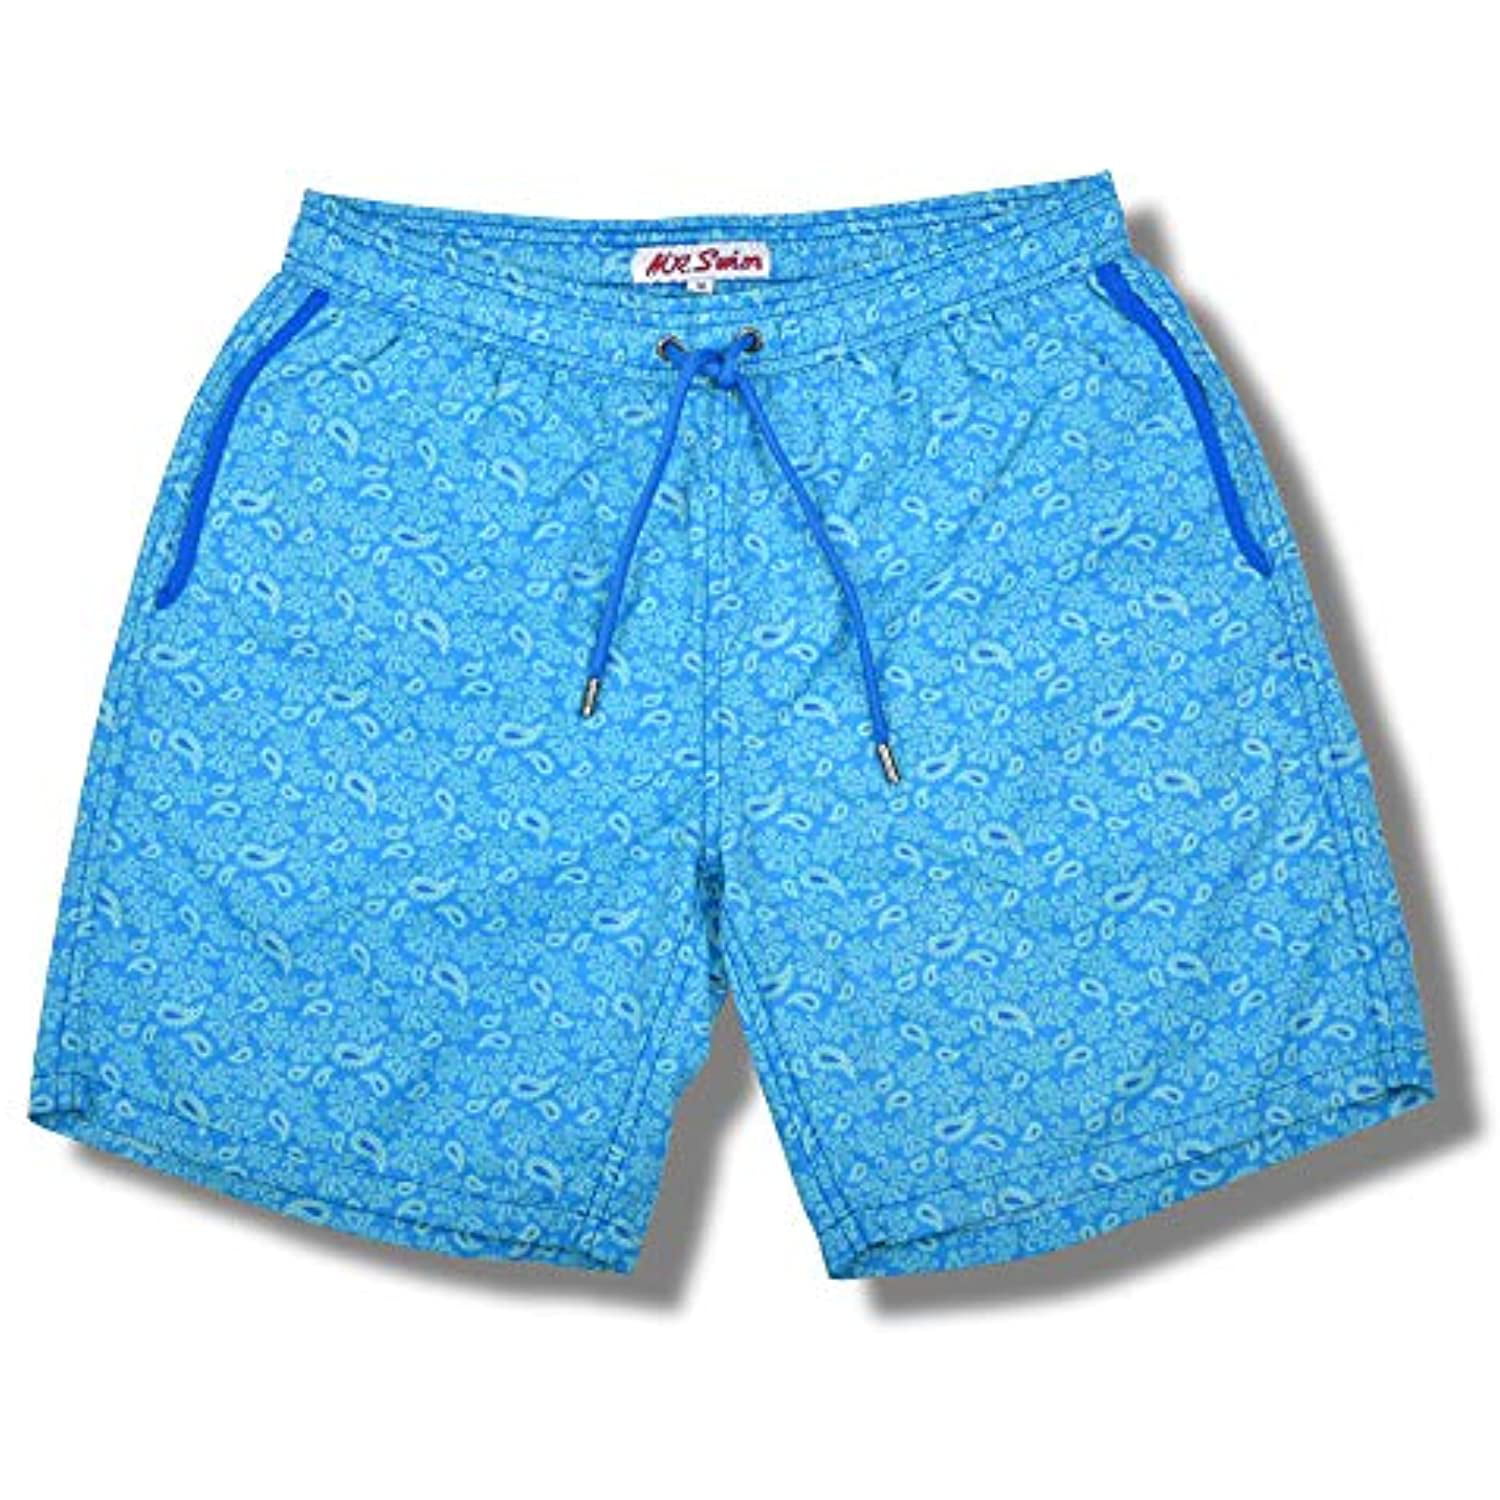 Mens Swim Shorts Quick Dry Swim Trunks Starry Sky Two Eagle Mens Bathing Suits with Mesh Lining